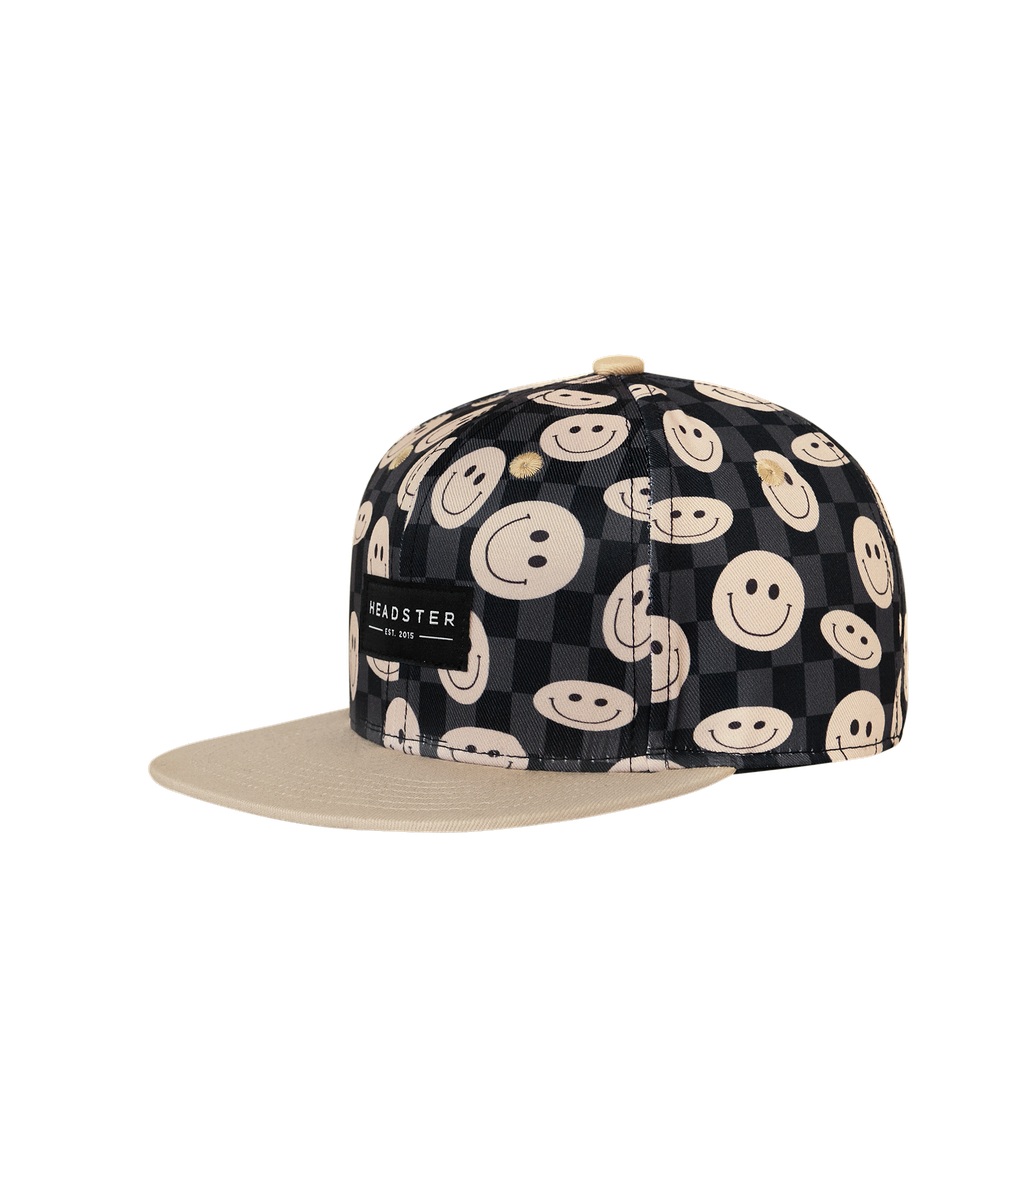 Headster - Casquette Smiley Snapback